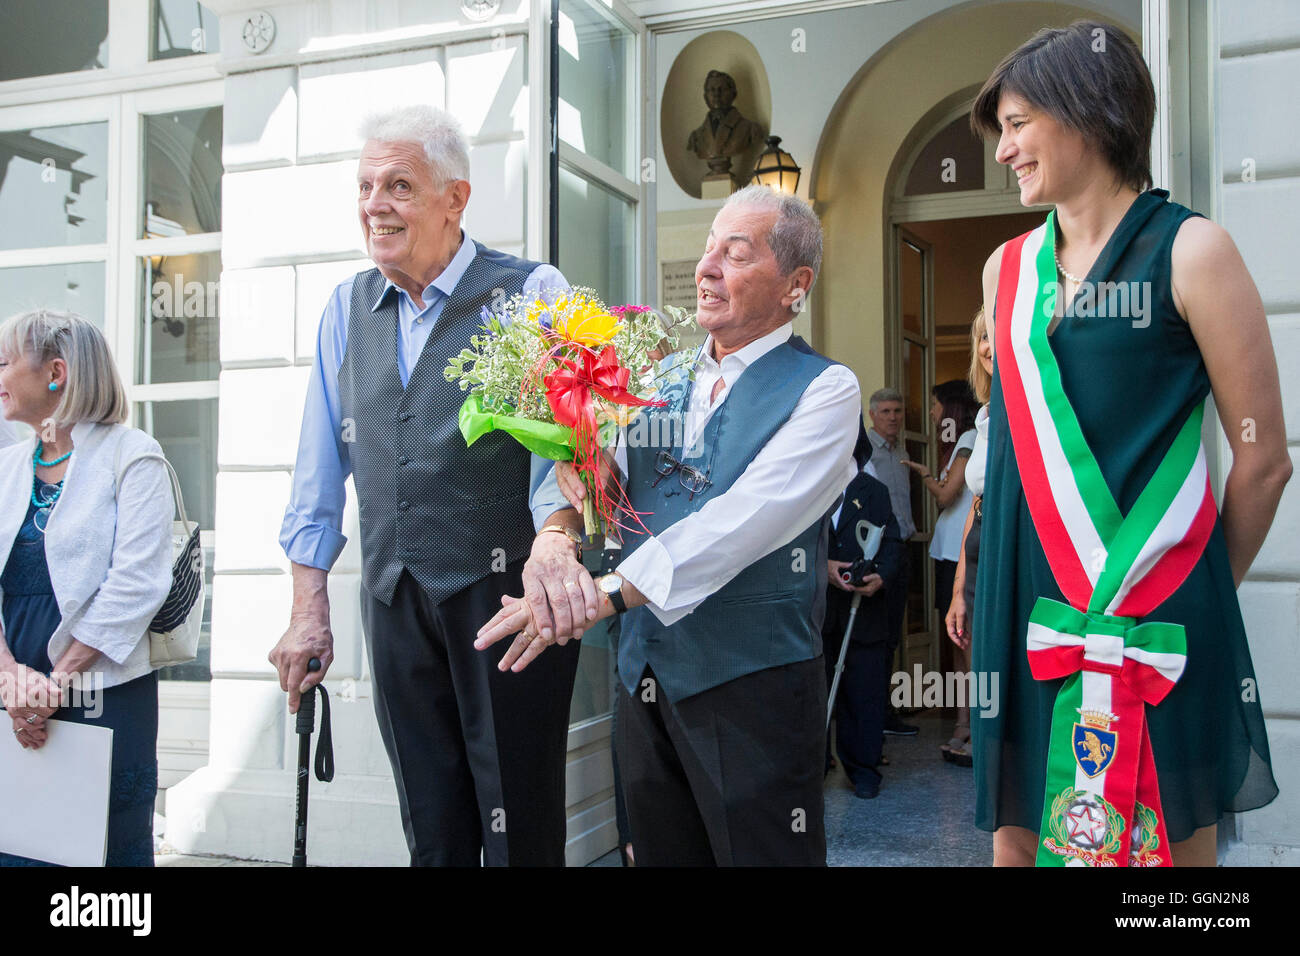 TURIN, ITALY - August 6, 2016: The mayor Chiara Appendino will receive the first declaration  of civil union constitution in Turin.  The first 'civilly united' will Franco and Gianni, respectively 82 and 79 years in a relationship that  has lasted more than 50 years 6 August 2016 in Turin, Italy Credit:  Black Mail Press/Alamy Live News Stock Photo